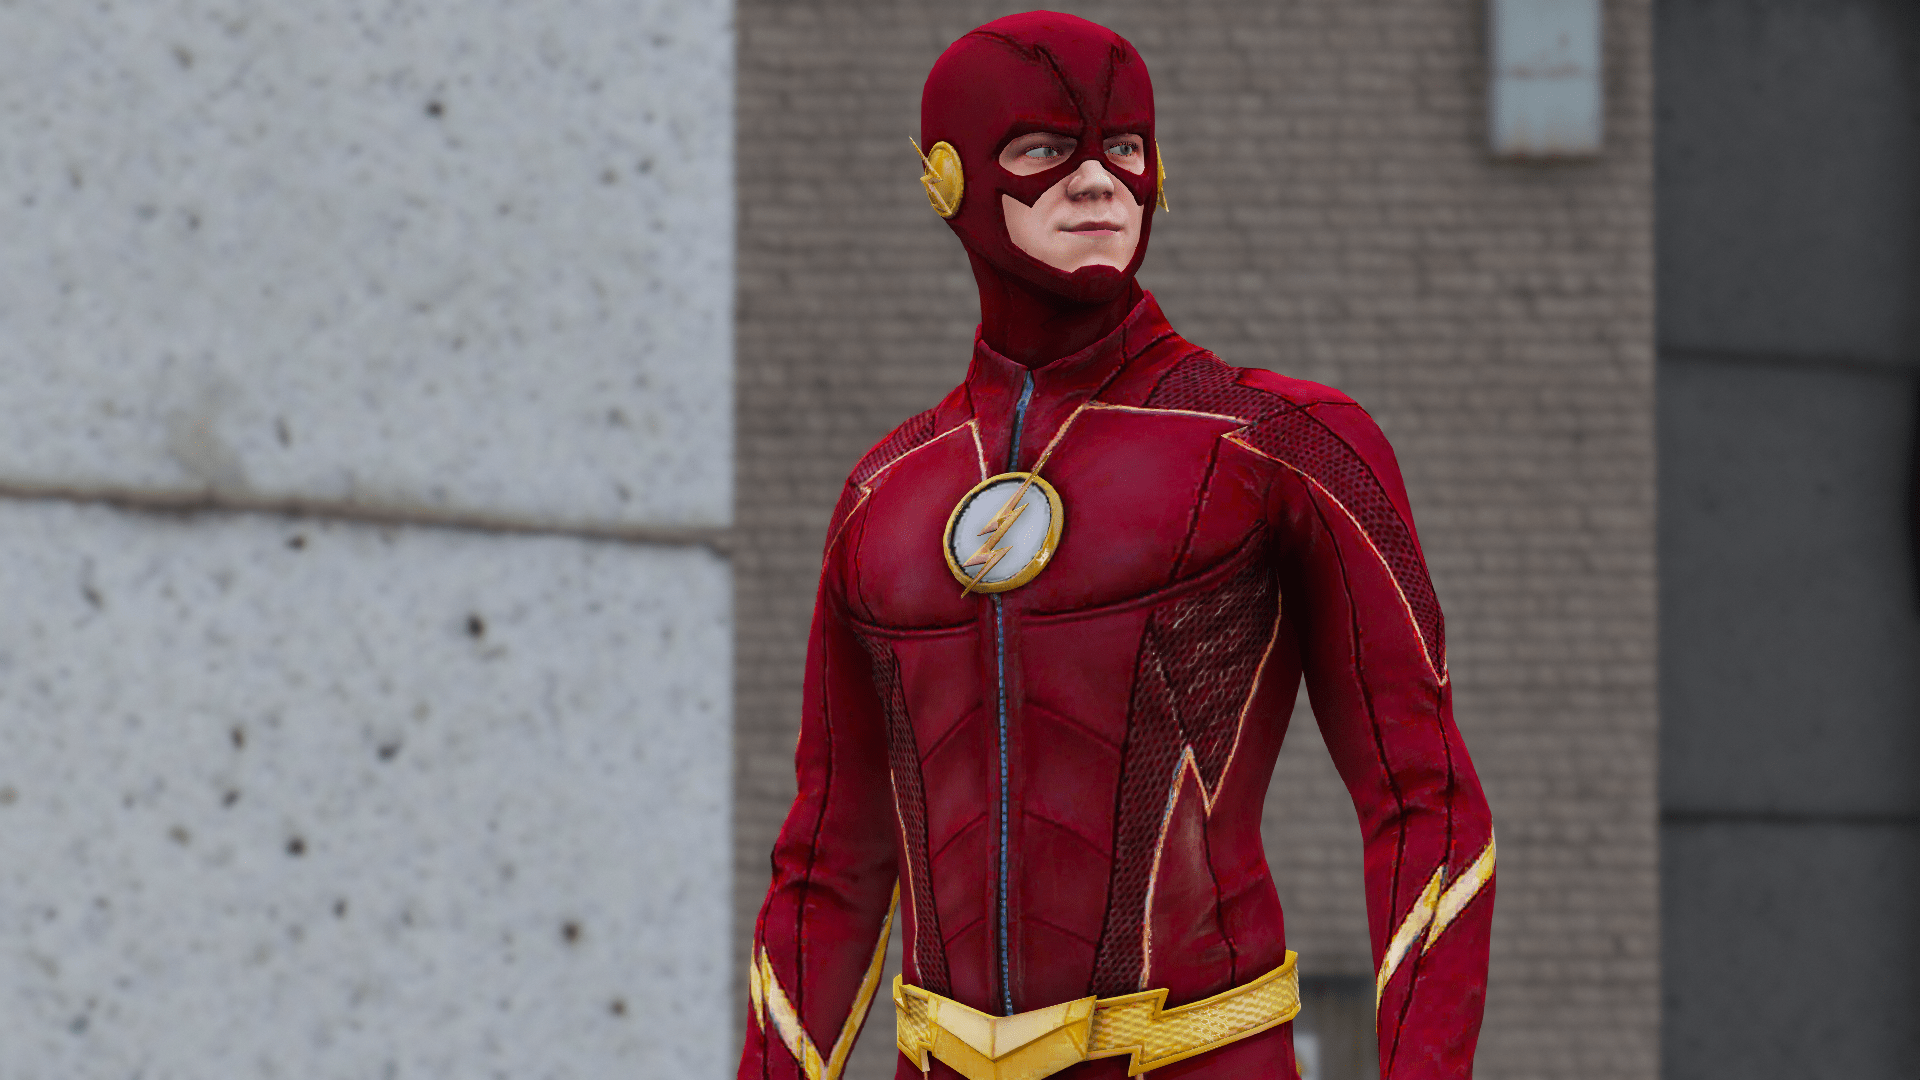 Awesome The Flash Season 4 Suit Learn more here!